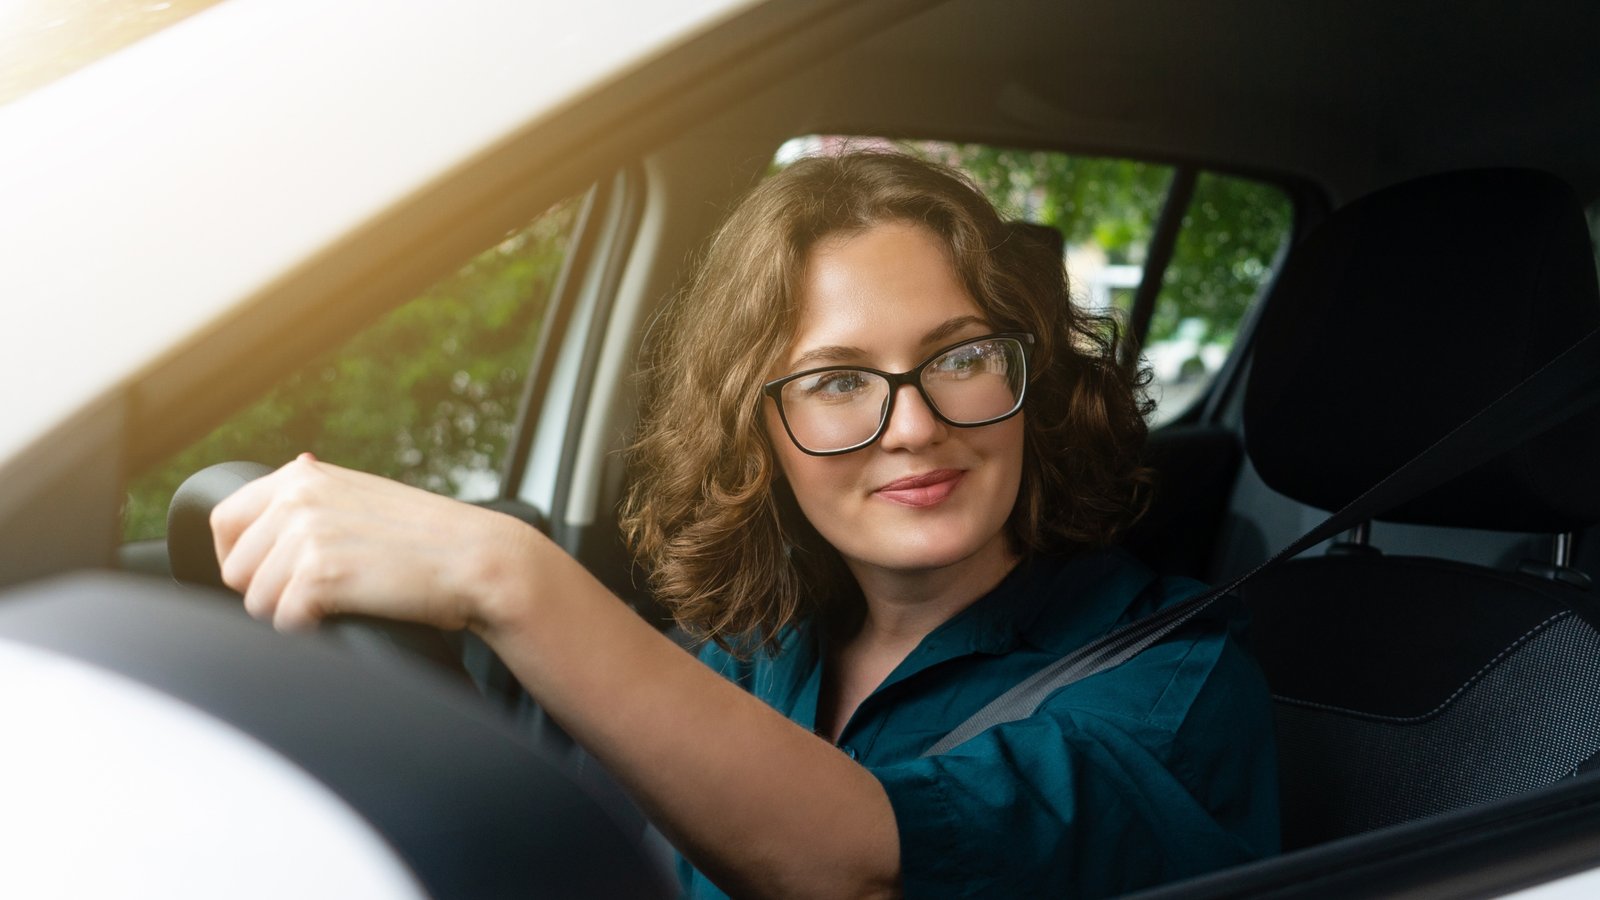 Tips for New Car Drivers